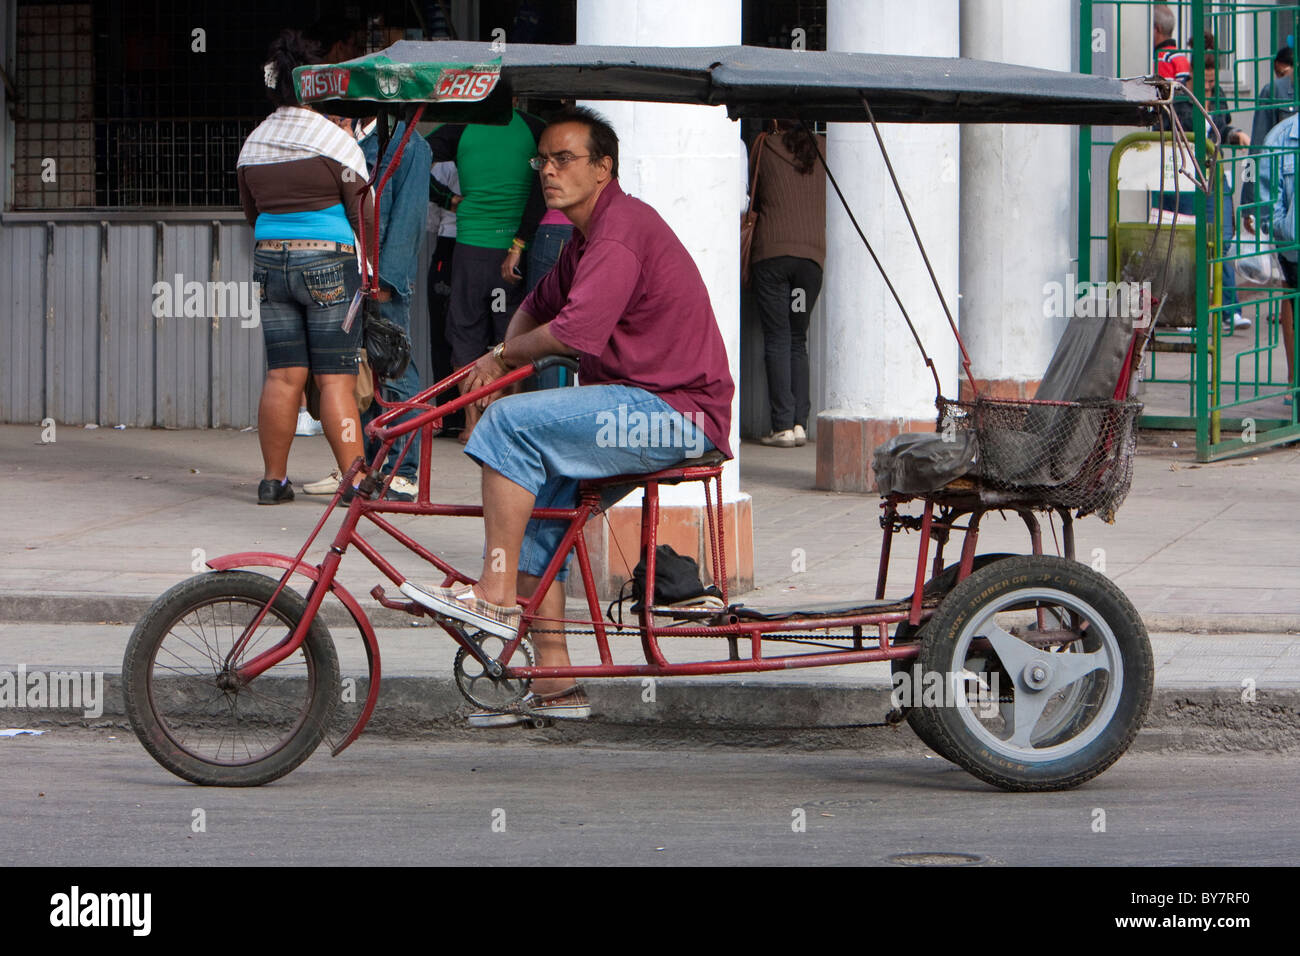 Cuba, Havana. Man-powered Bicycle-Taxis ('Bicitaxis') provide a cheap form of transportation in urban Havana. Stock Photo